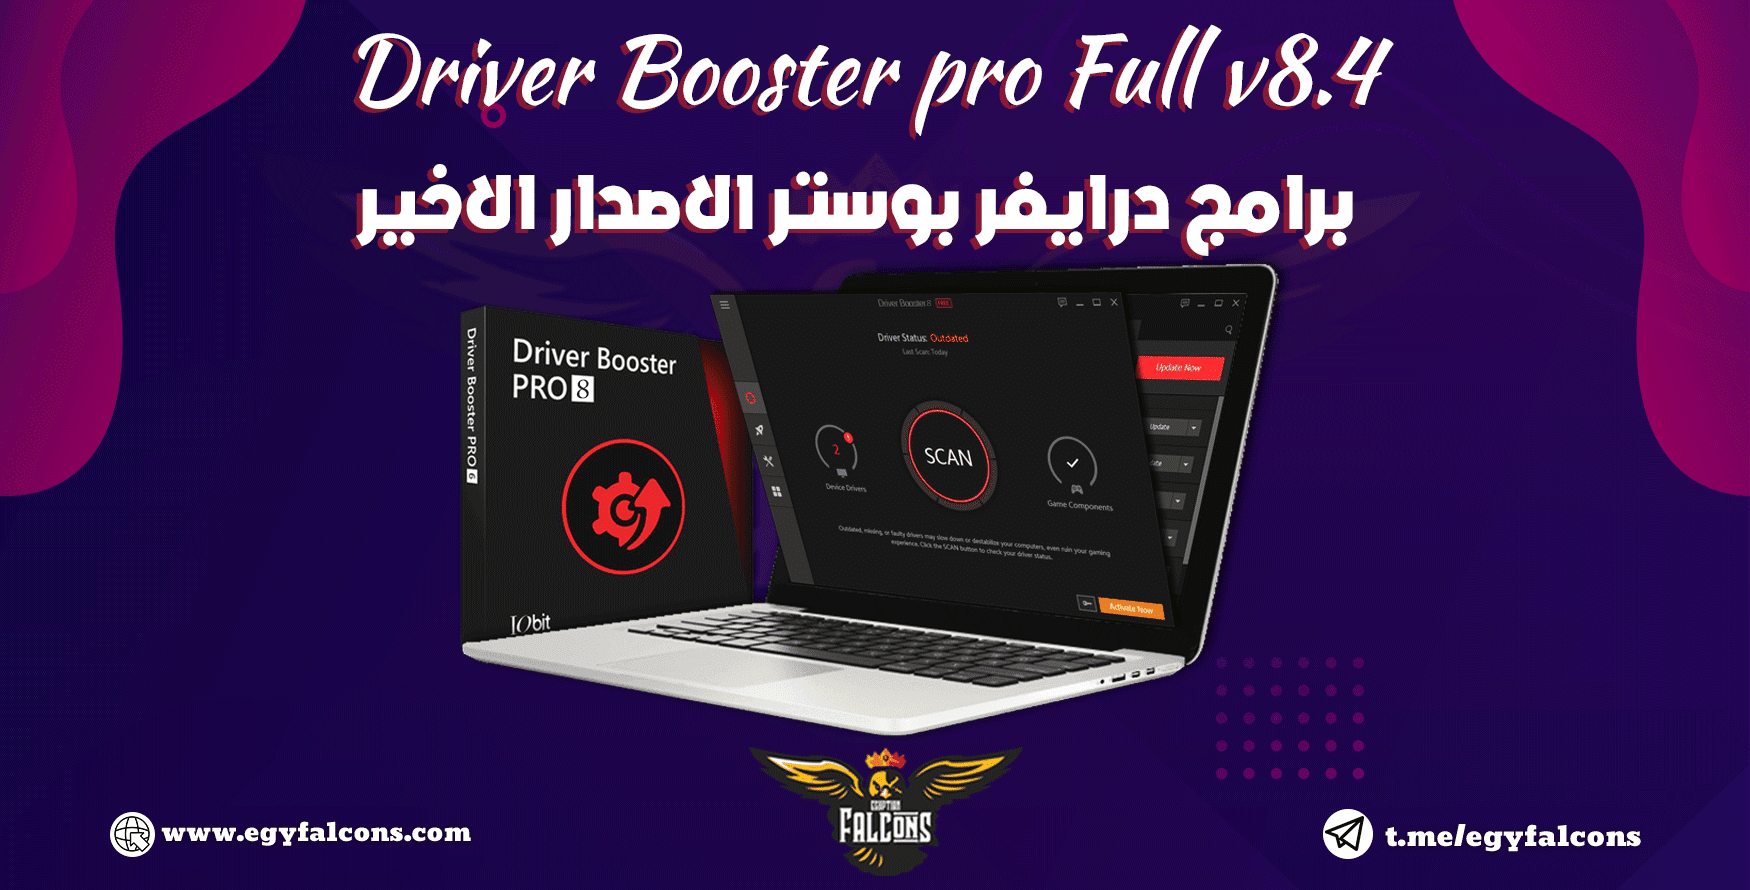 iobit driver booster pro 2021